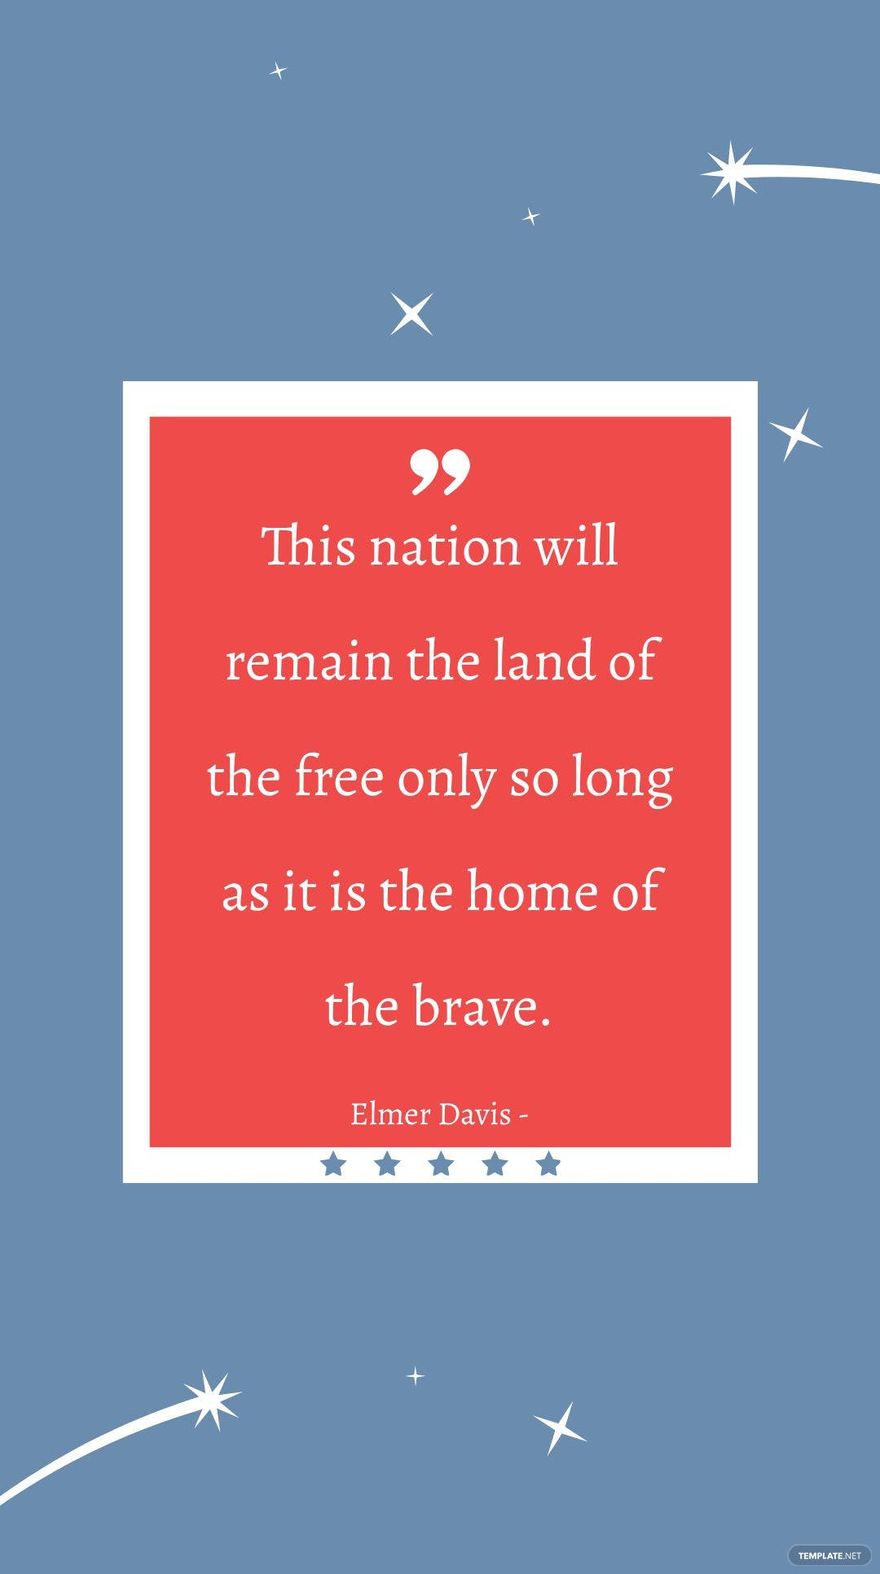 Elmer Davis - This nation will remain the land of the only so long as it is the home of the brave. in JPG